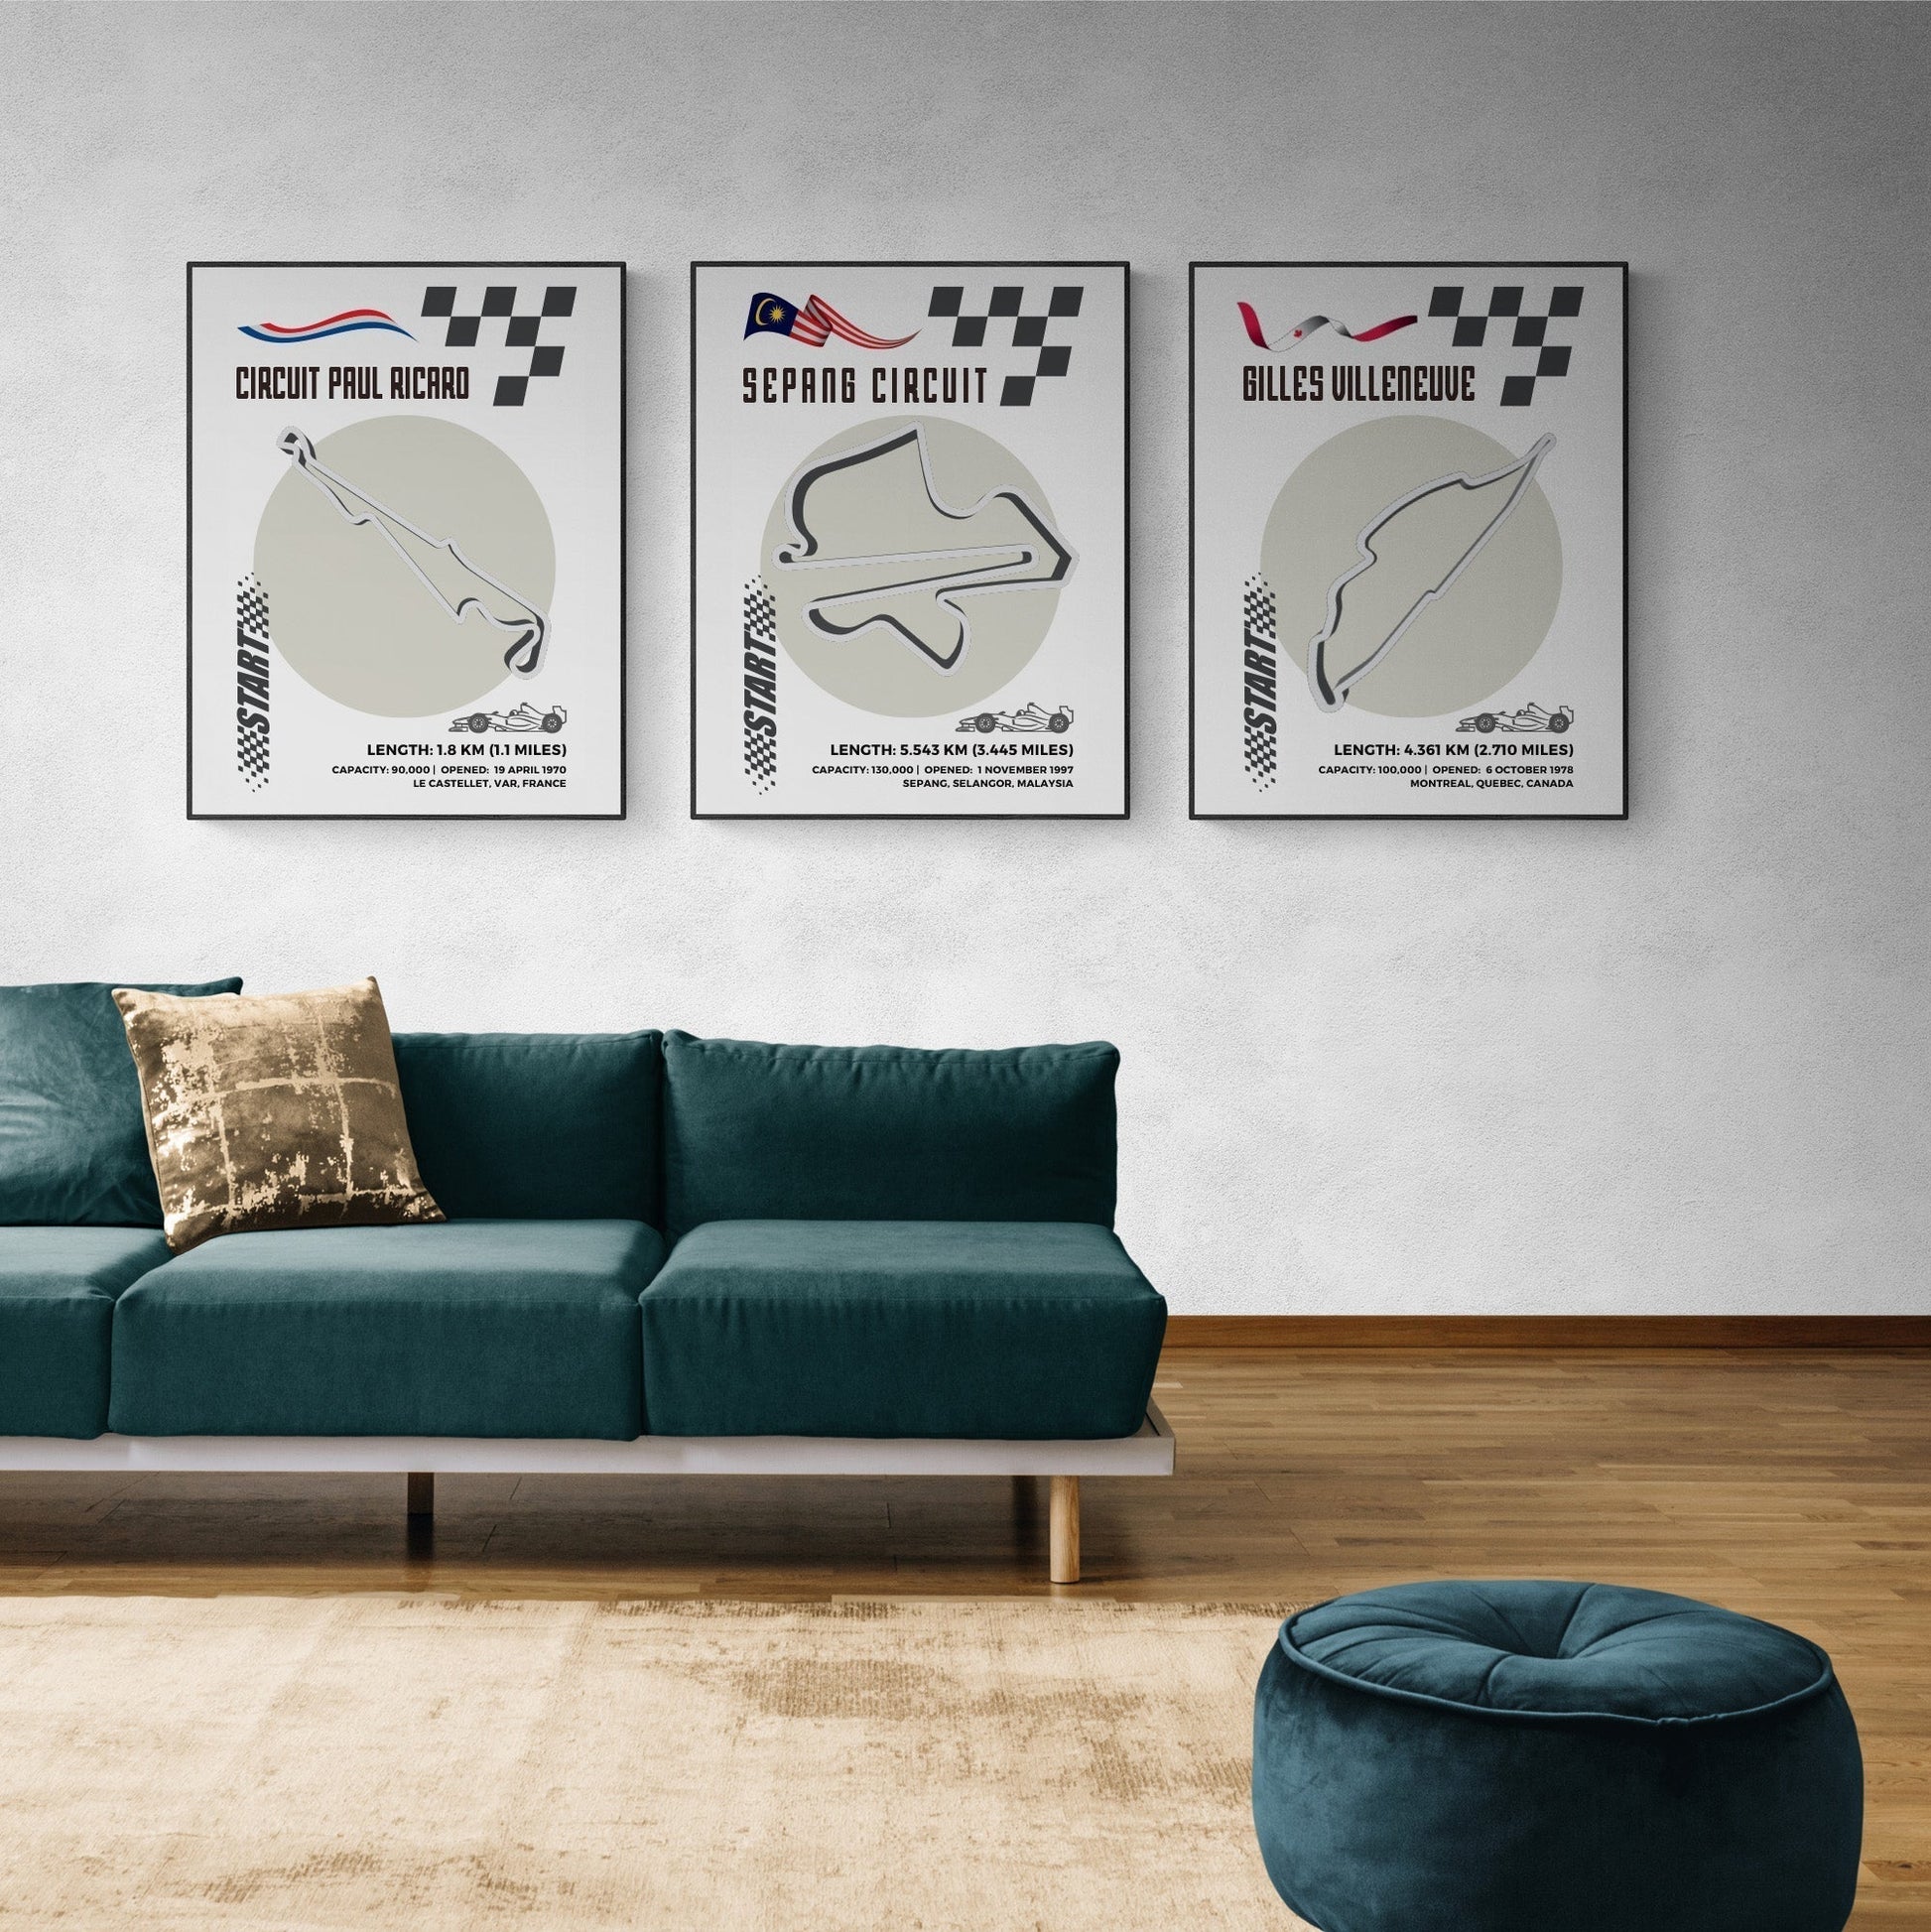 Discover the ultimate gift for any Formula One fan - Autodromo Hermanos Rodriguez F1 Posters. Experience the thrill of every twist and turn with the detailed map F1 racing tracks and circuit guide, featuring the circuit's history, country, and notable moments. Printed on age-resistant matte paper, these posters are a must-have for any racing enthusiast.